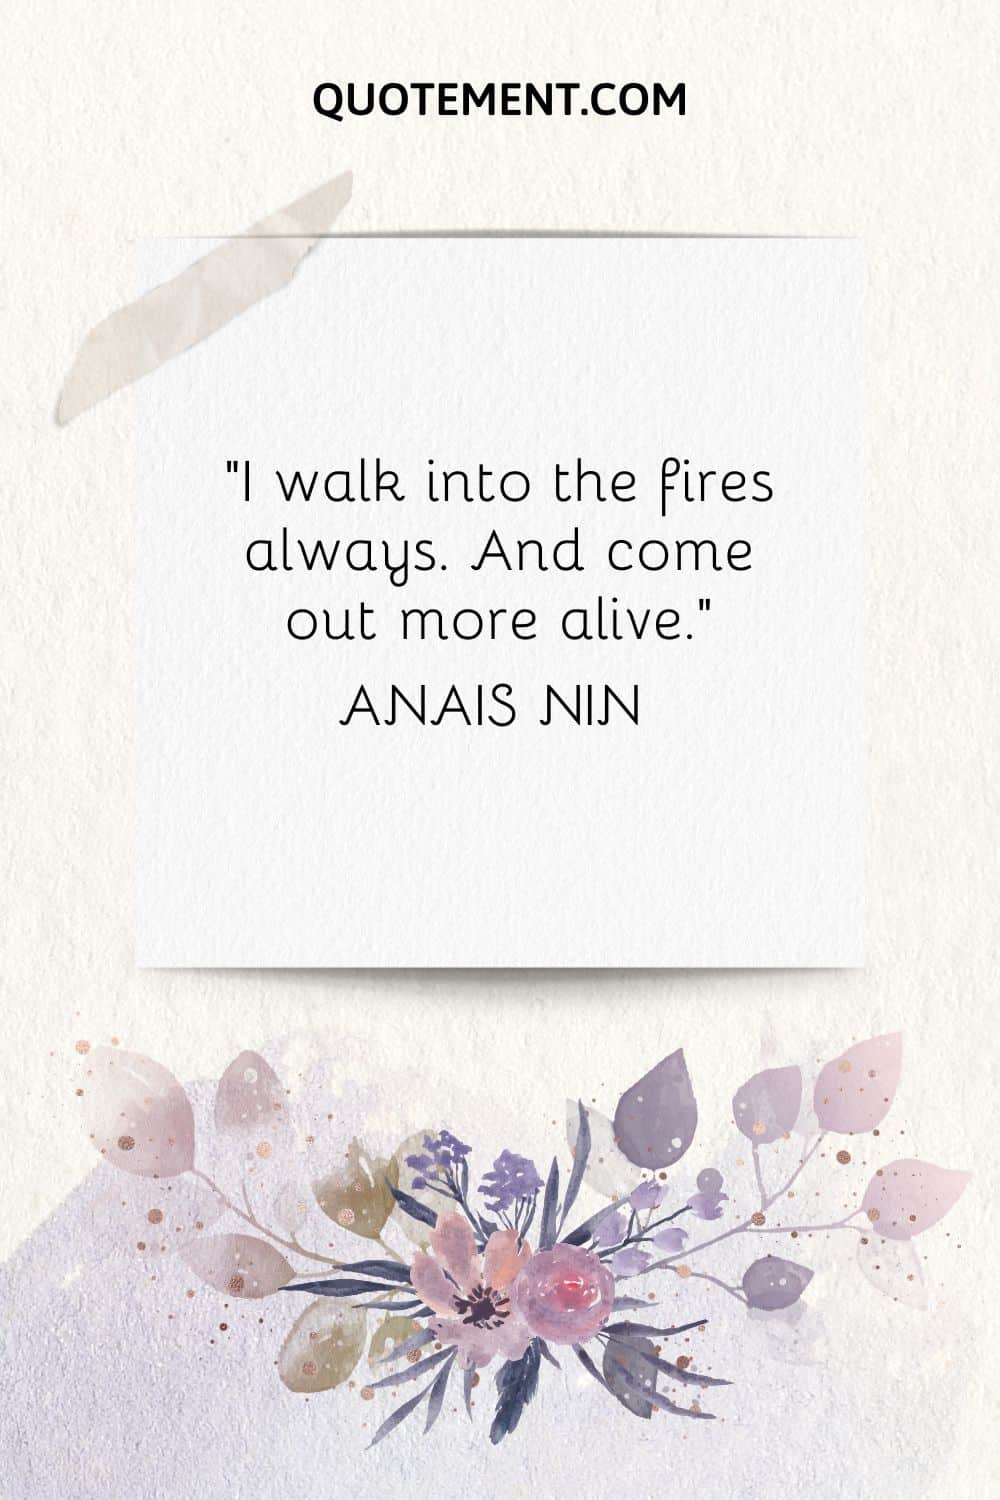 “I walk into the fires always. And come out more alive.” — Anais Nin